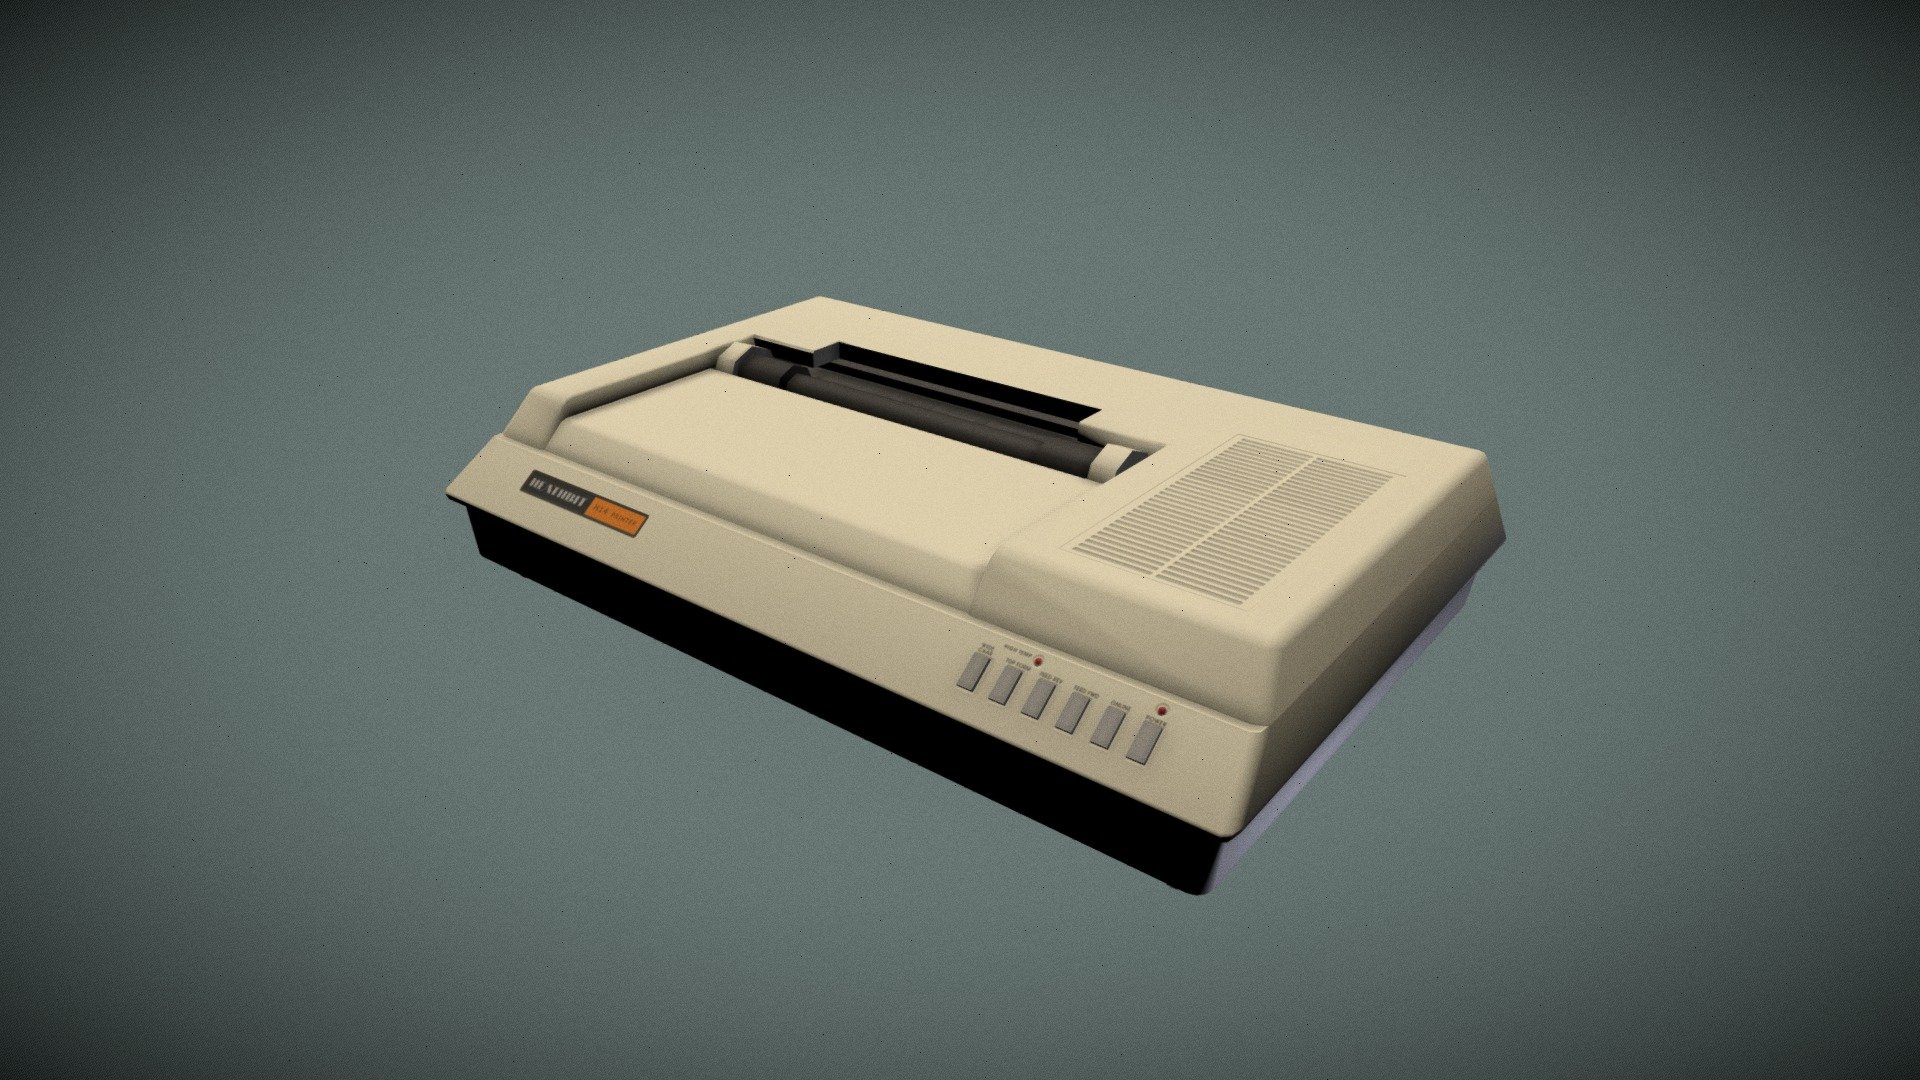 Inspired from an early matrix printer by Heathkit. Low poly model I made to use in games. Only 592 triangles - Retro Matrix Printer - 3D model by swedishboy 3d model